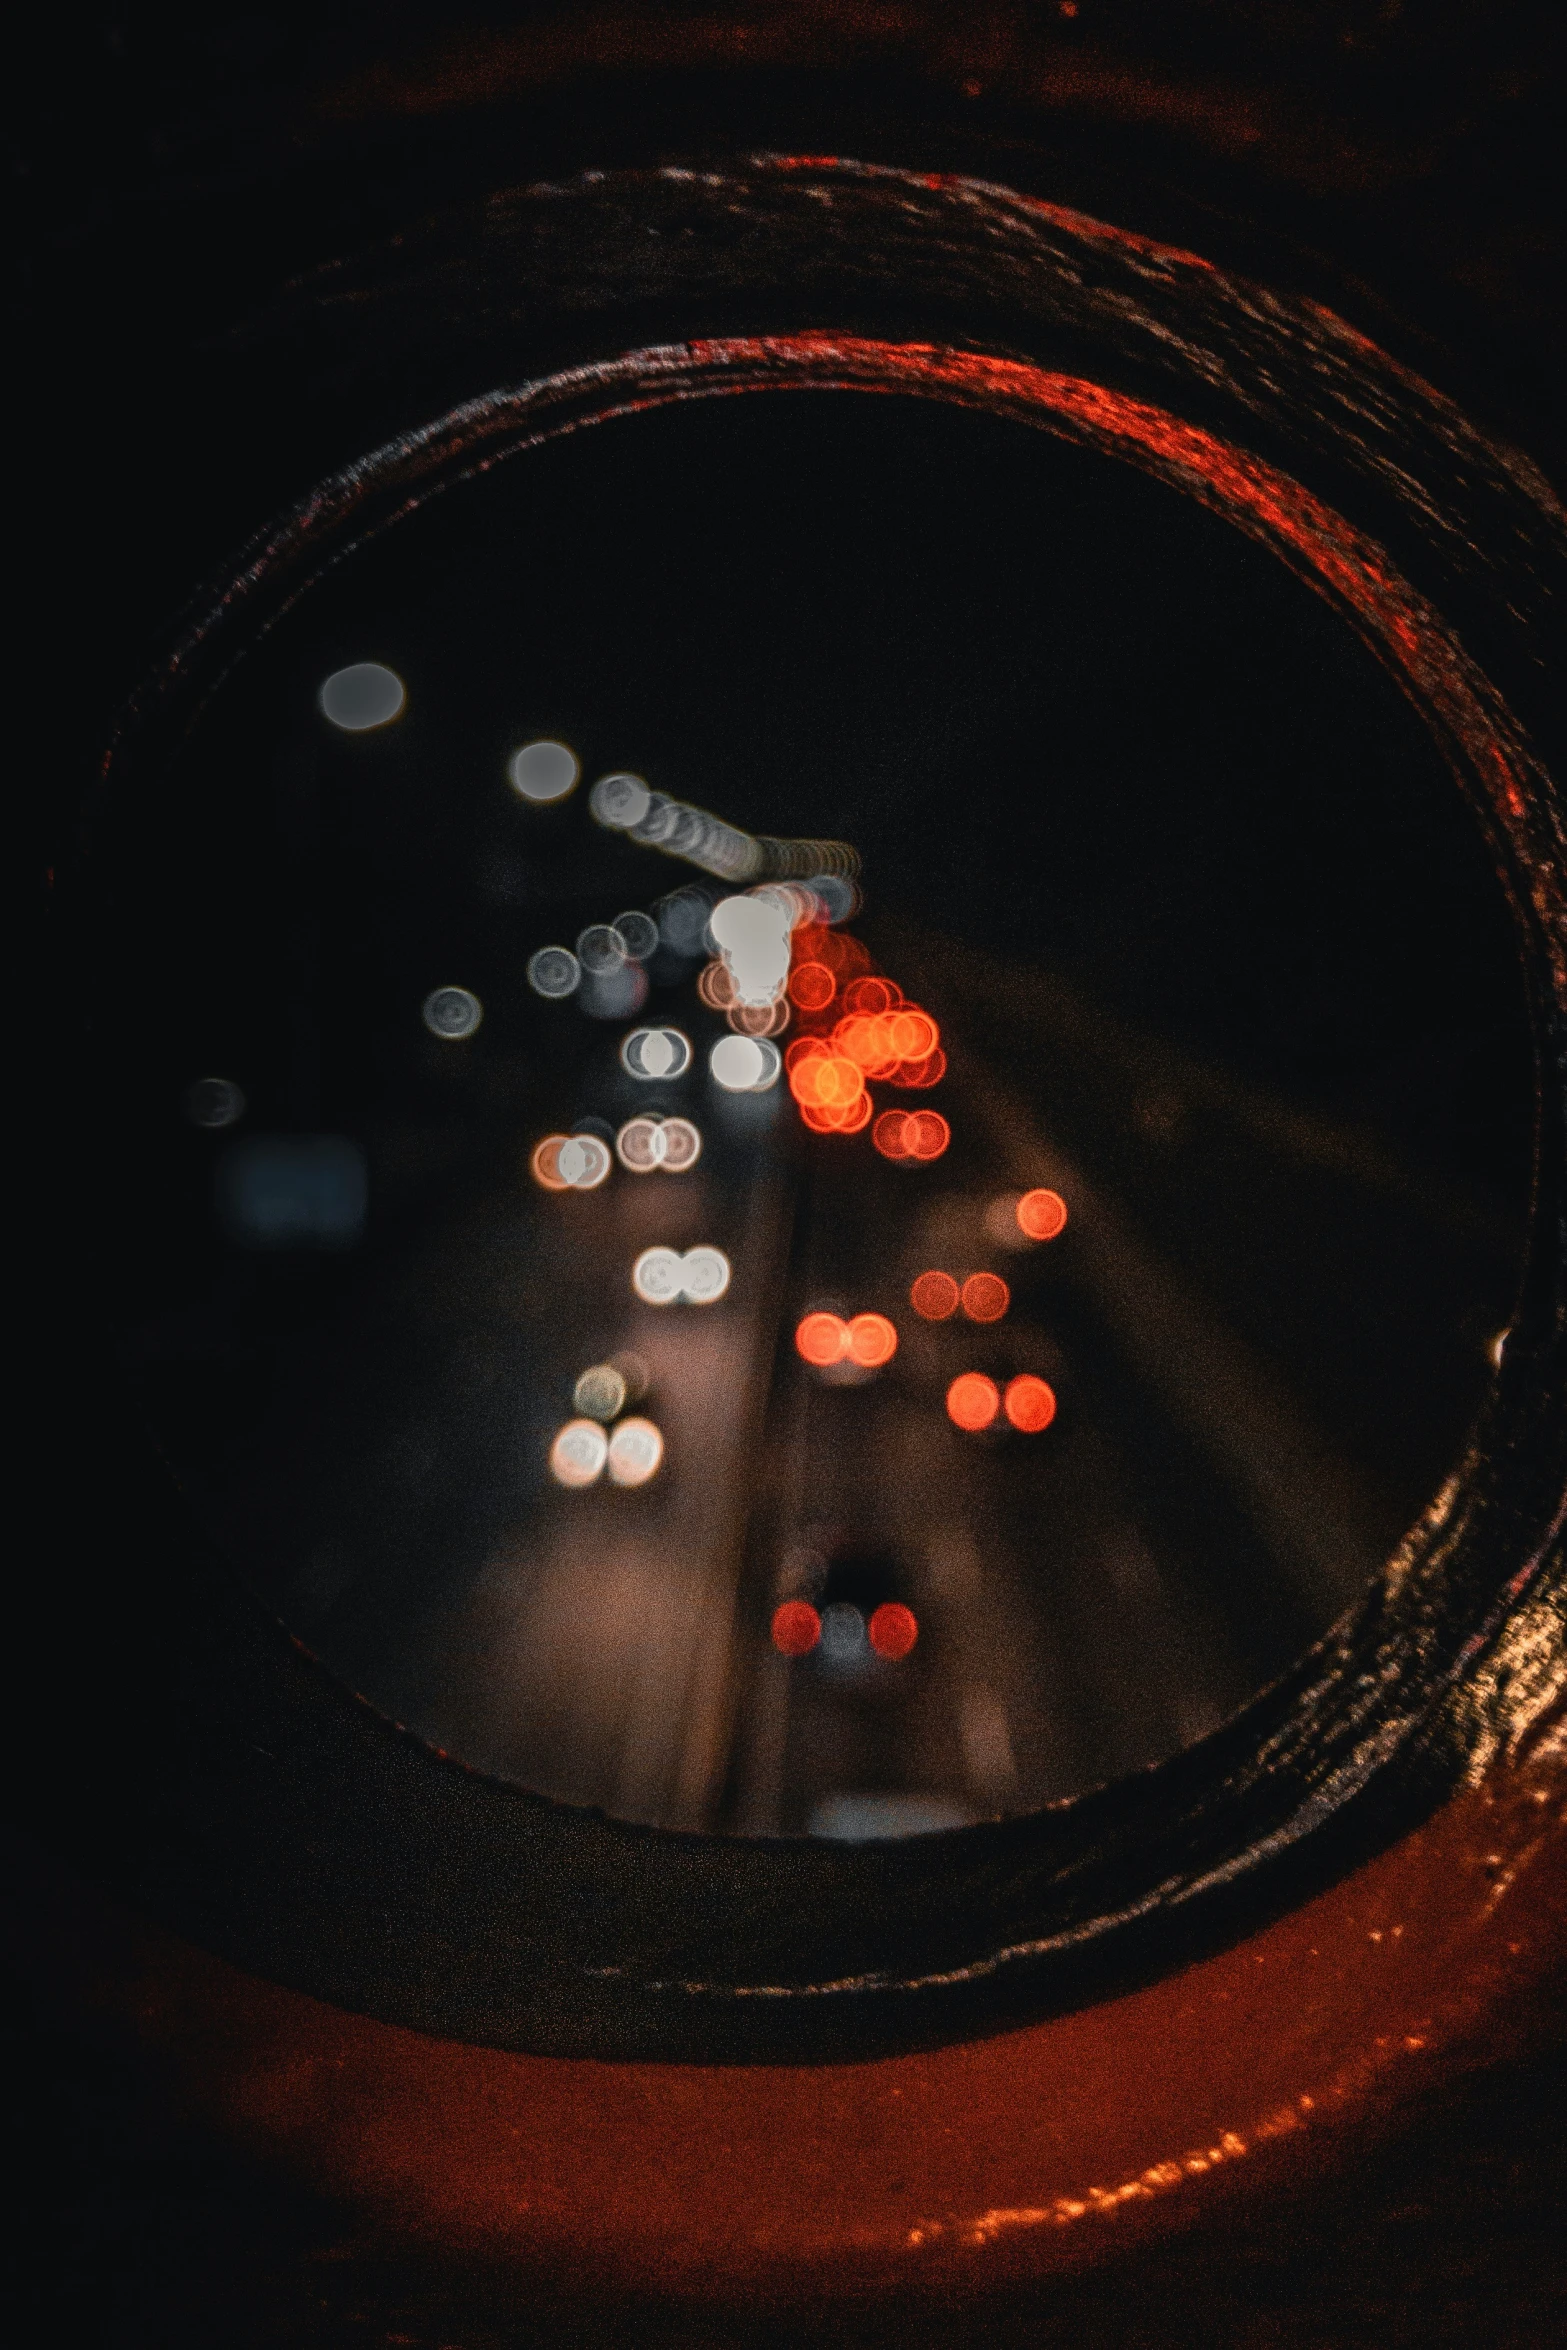 a view down at night in a traffic light